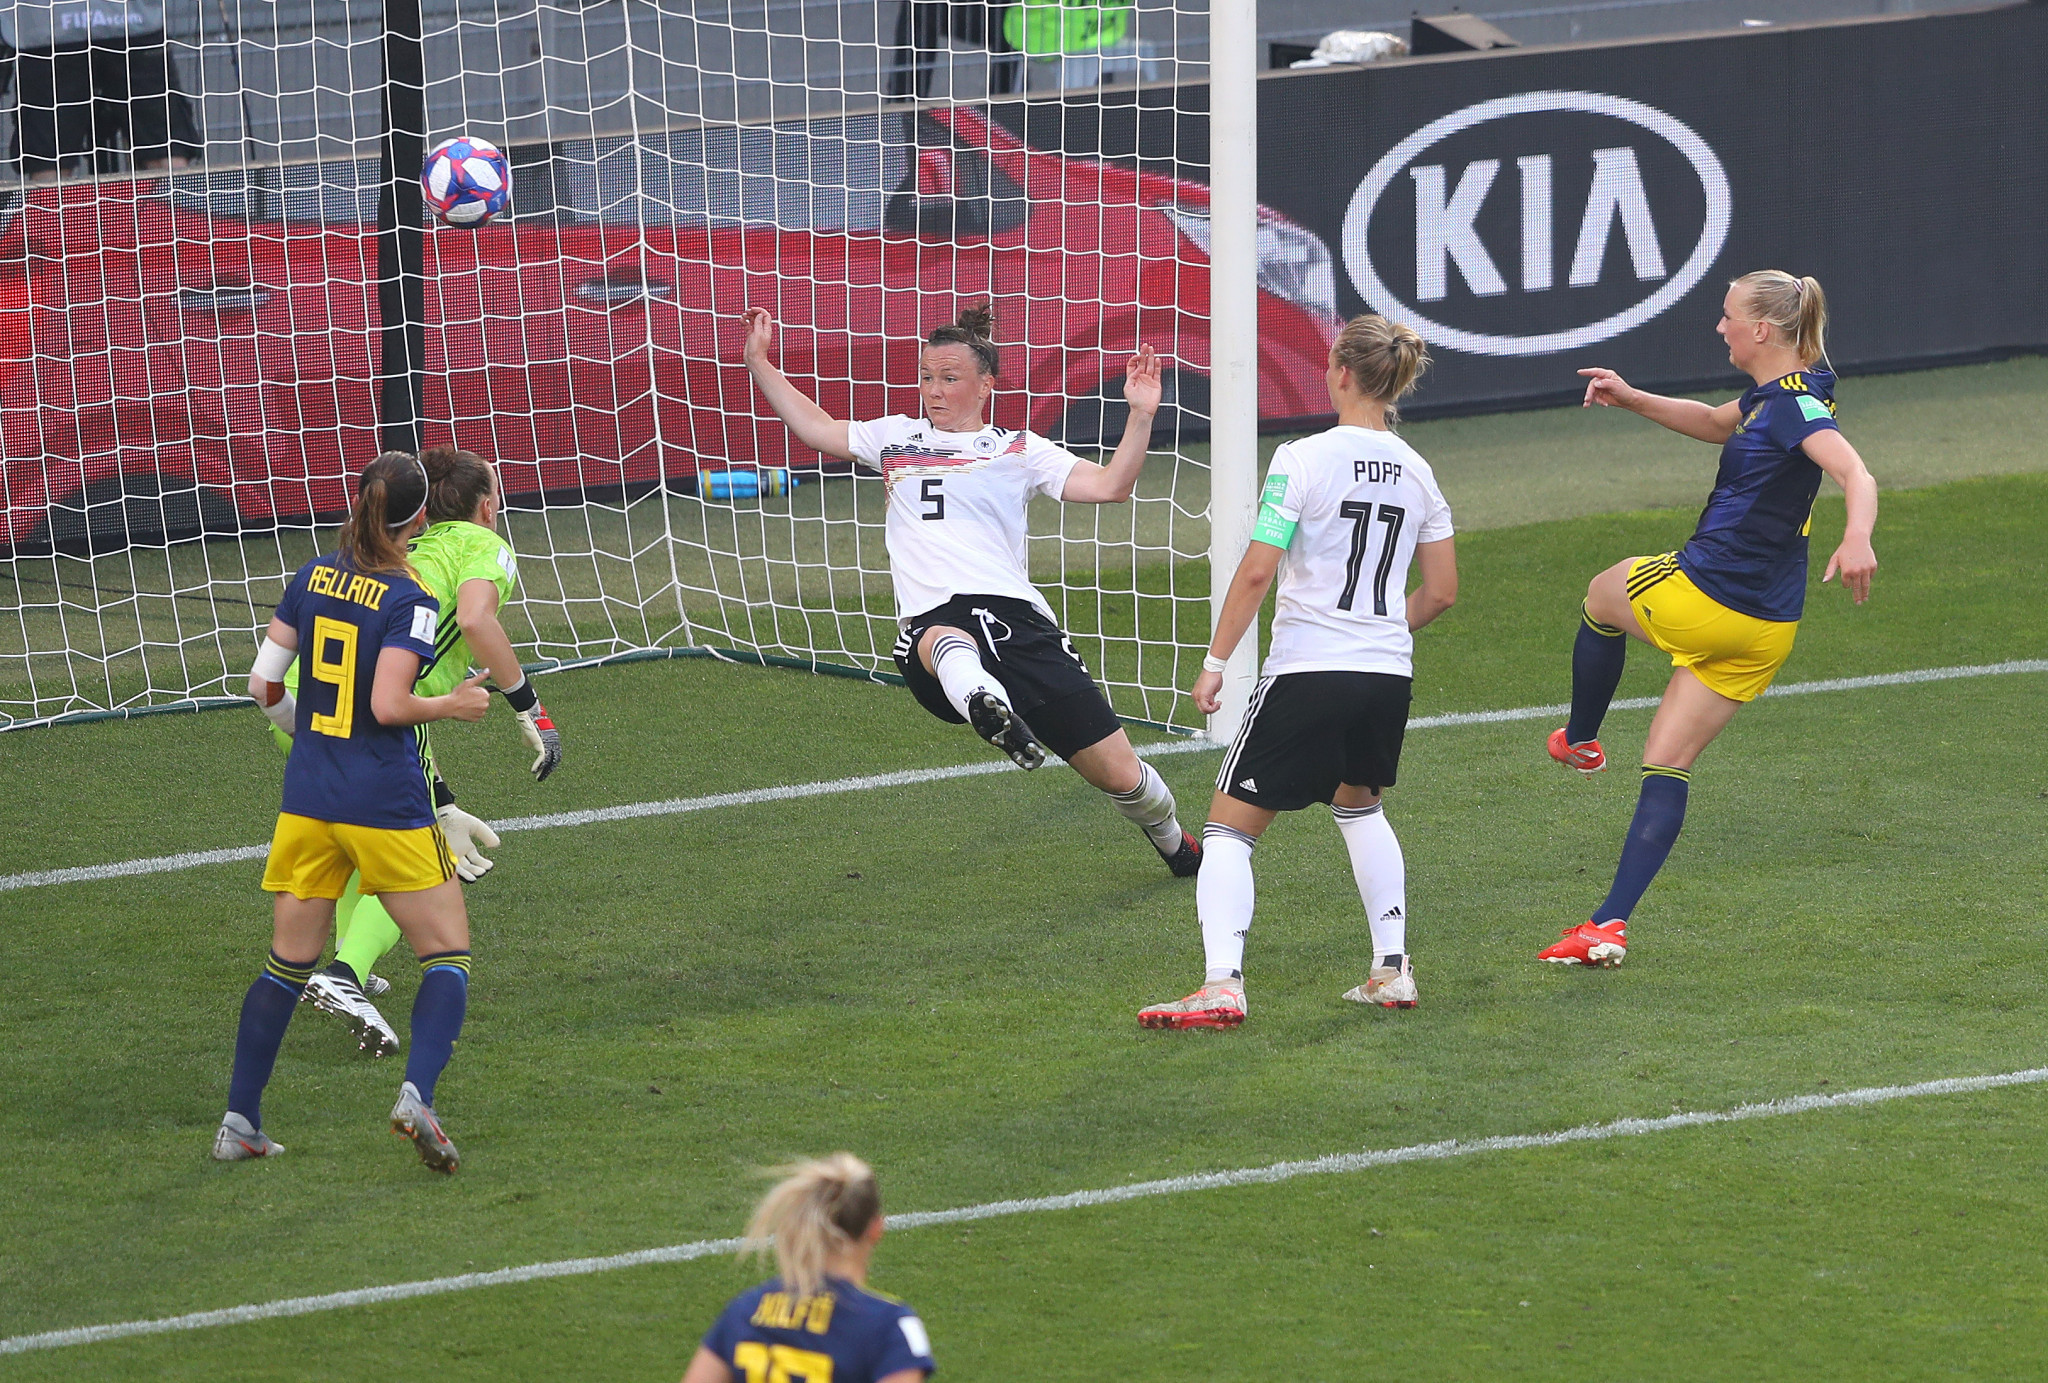 Stina Blackstenius scored the winning goal for Sweden in their FIFA Women's World Cup quarter-final as her team gained revenge over Germany for their defeat in the Olympic Games final at Rio 2016 ©Getty Images